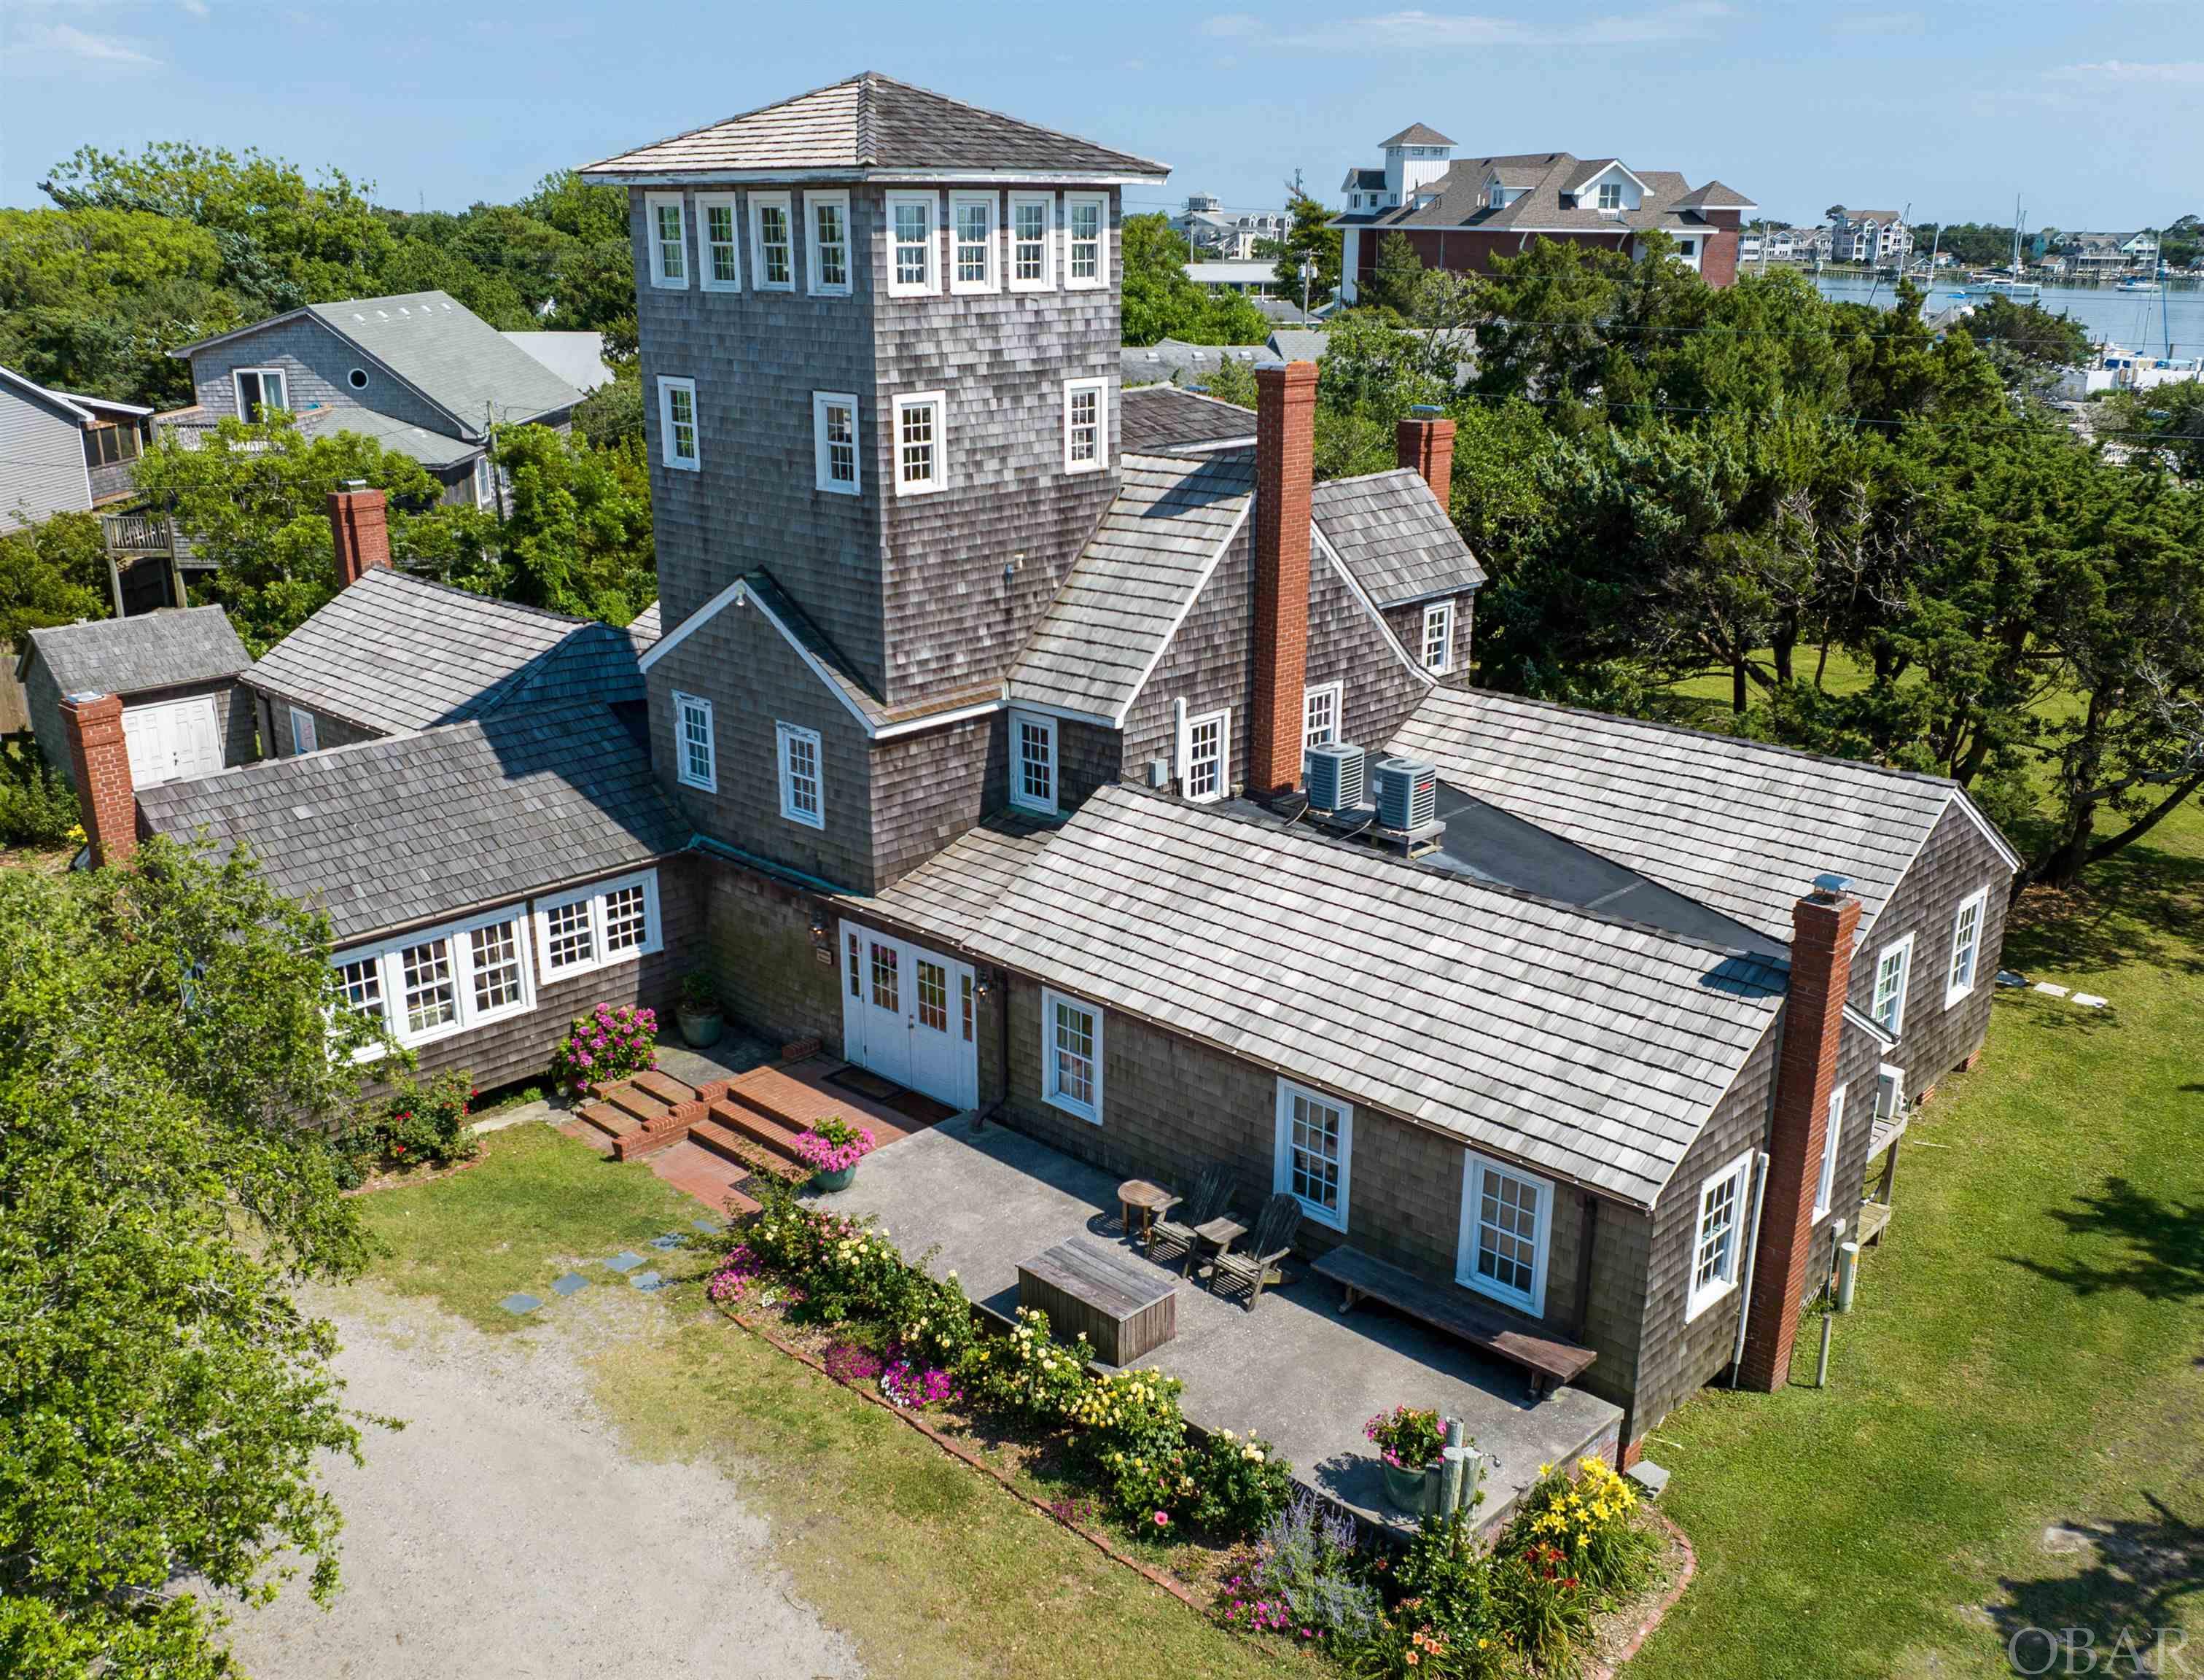 The Berkley brings Ocracoke home. Encompassing nearly 2.5 acres, a village concept building plan combining lodging, retail, dining, event services, and community gatherings brings Ocracoke back to its origin - Silver Lake Harbor. The Berkley village would be a destination for all visitors, including the 600-700 daily passengers aboard the Ocracoke Express Ferry. Existing infrastructure includes the 6 bedroom, 5 1/2 bathroom Manor, 6 bedroom 4 bathroom Suites, the Berkley Barn wedding and event center, and water and septic to accommodate expansion.  The 5,810 sq ft Manor was built by legend Sam Jones with exquisite woodworking and a flair for design. It includes 6bd/5 1/2ba, a commercial kitchen, 25 seat dining room, 4 cozy fireplaces, and was meticulously renovated in 2012.  The Suites, built in 2017, contain 6br/4ba across 2,640 sq ft with a full kitchen, dining and living room. A destination accommodation that enhances the Berkley experience. The Barn, a focal point for all celebrations in the community, weddings, and reunions, is Northeastern North Carolina's premier wedding center and is solidly booked through 2022 and 2023.  Matterport 3D tours are available for all three buildings by using the links at the end of the description.  Three additional residential/commercial lots encompassing nearly 30,000 sq ft with existing septic are available to be used as restaurants, retail shops, condos, or residential.   Community septic on site can accommodate an additional 24 bedrooms. Lots 3, 4, 5, & 6 are included.   Manor: https://my.matterport.com/show/?m=q1YKGozZt8A Suites: https://my.matterport.com/show/?m=YNLmPVa7EAn Barn: https://my.matterport.com/show/?m=KxZqsx6ed7G